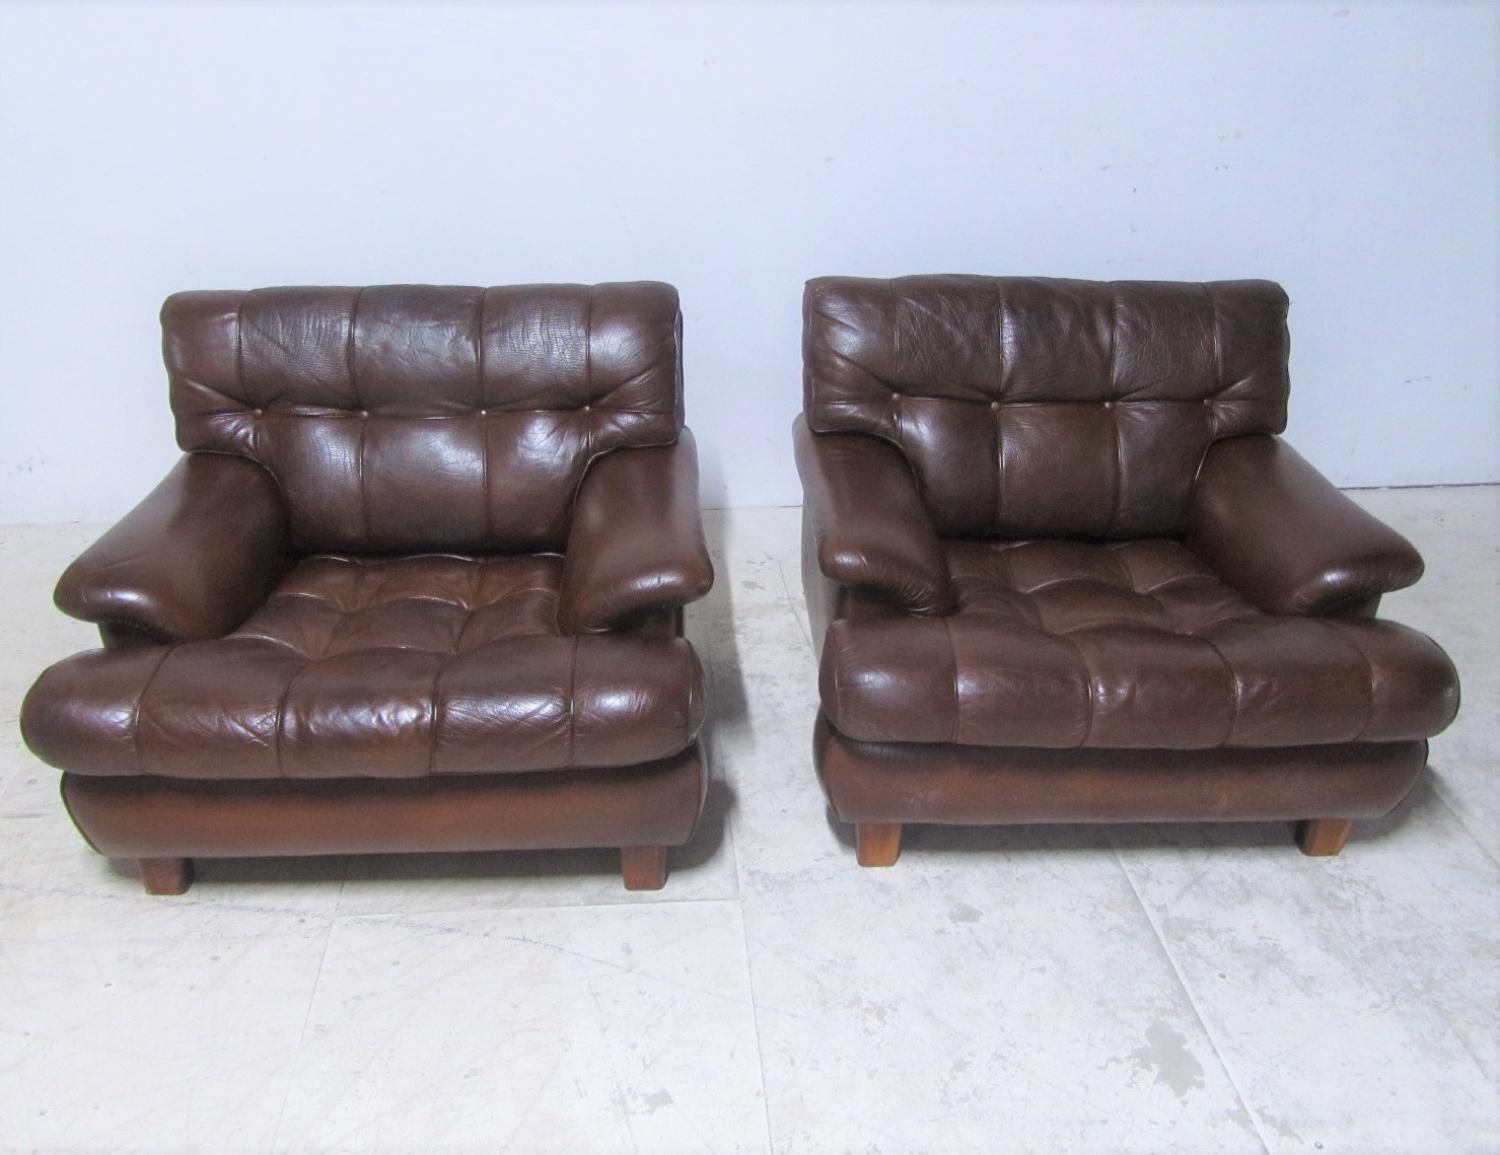 A pair of leather chairs by Arne Norrell